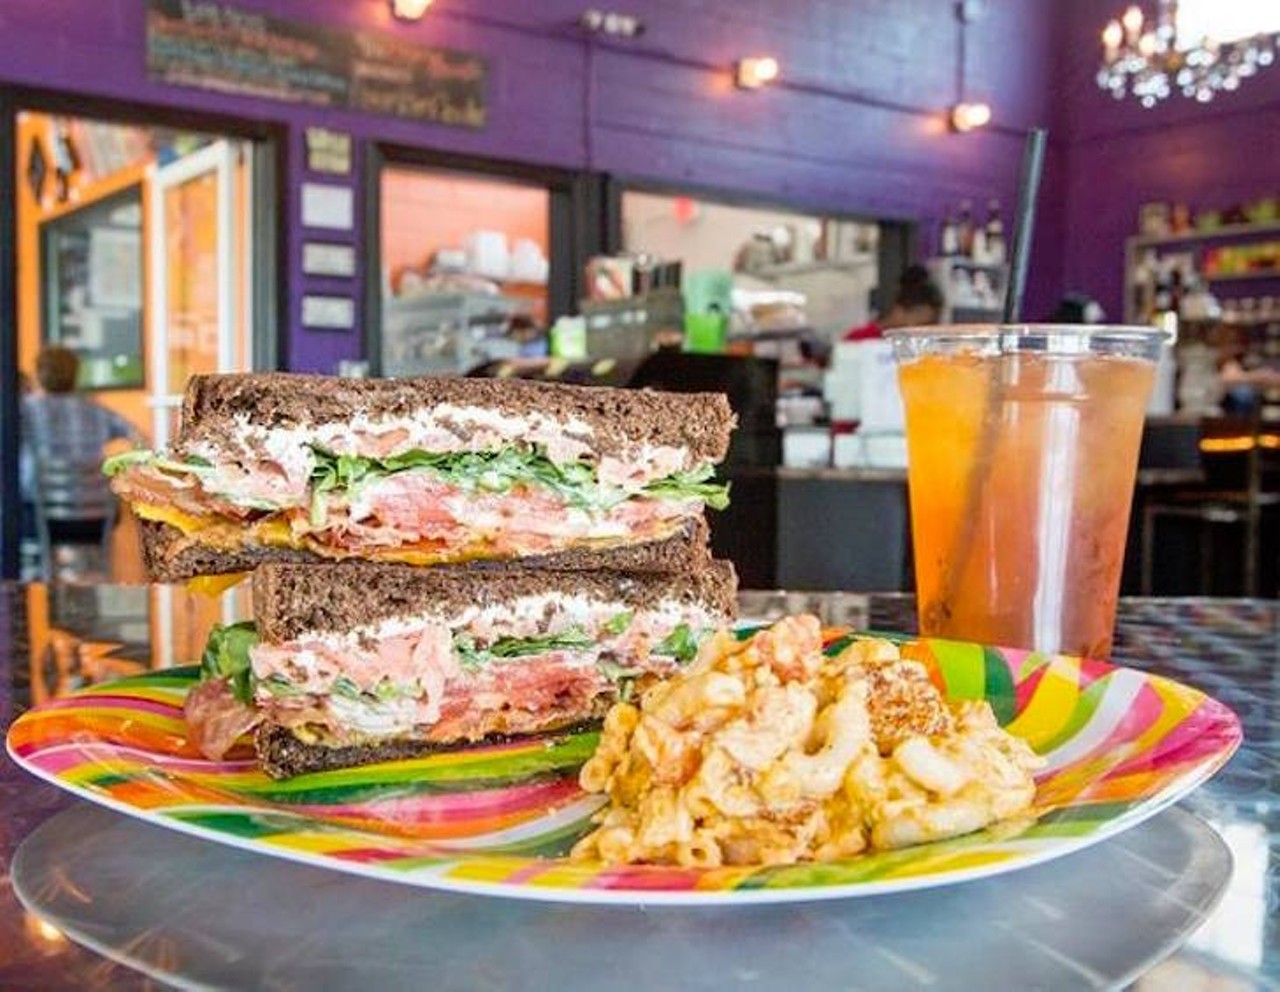 Pom Pom's Teahouse & Sandwicheria   
2950 Central Ave., St. Petersburg, 727-873-6992
Central Avenue is home to the second branch of this quirky, taste bud-bending sandwich shop. Built out of a repurposed filling station, Pom Pom&#146;s Teahouse & Sandwicheria is the brainchild of Pom Moongauklang, a Thai-American chef who, before setting up shop in Orlando, worked in New York&#146;s Michelin-star restaurant Nobu.
Photo via Pom Pom's Teahouse and Sandwicheria, St. Pete/Facebook